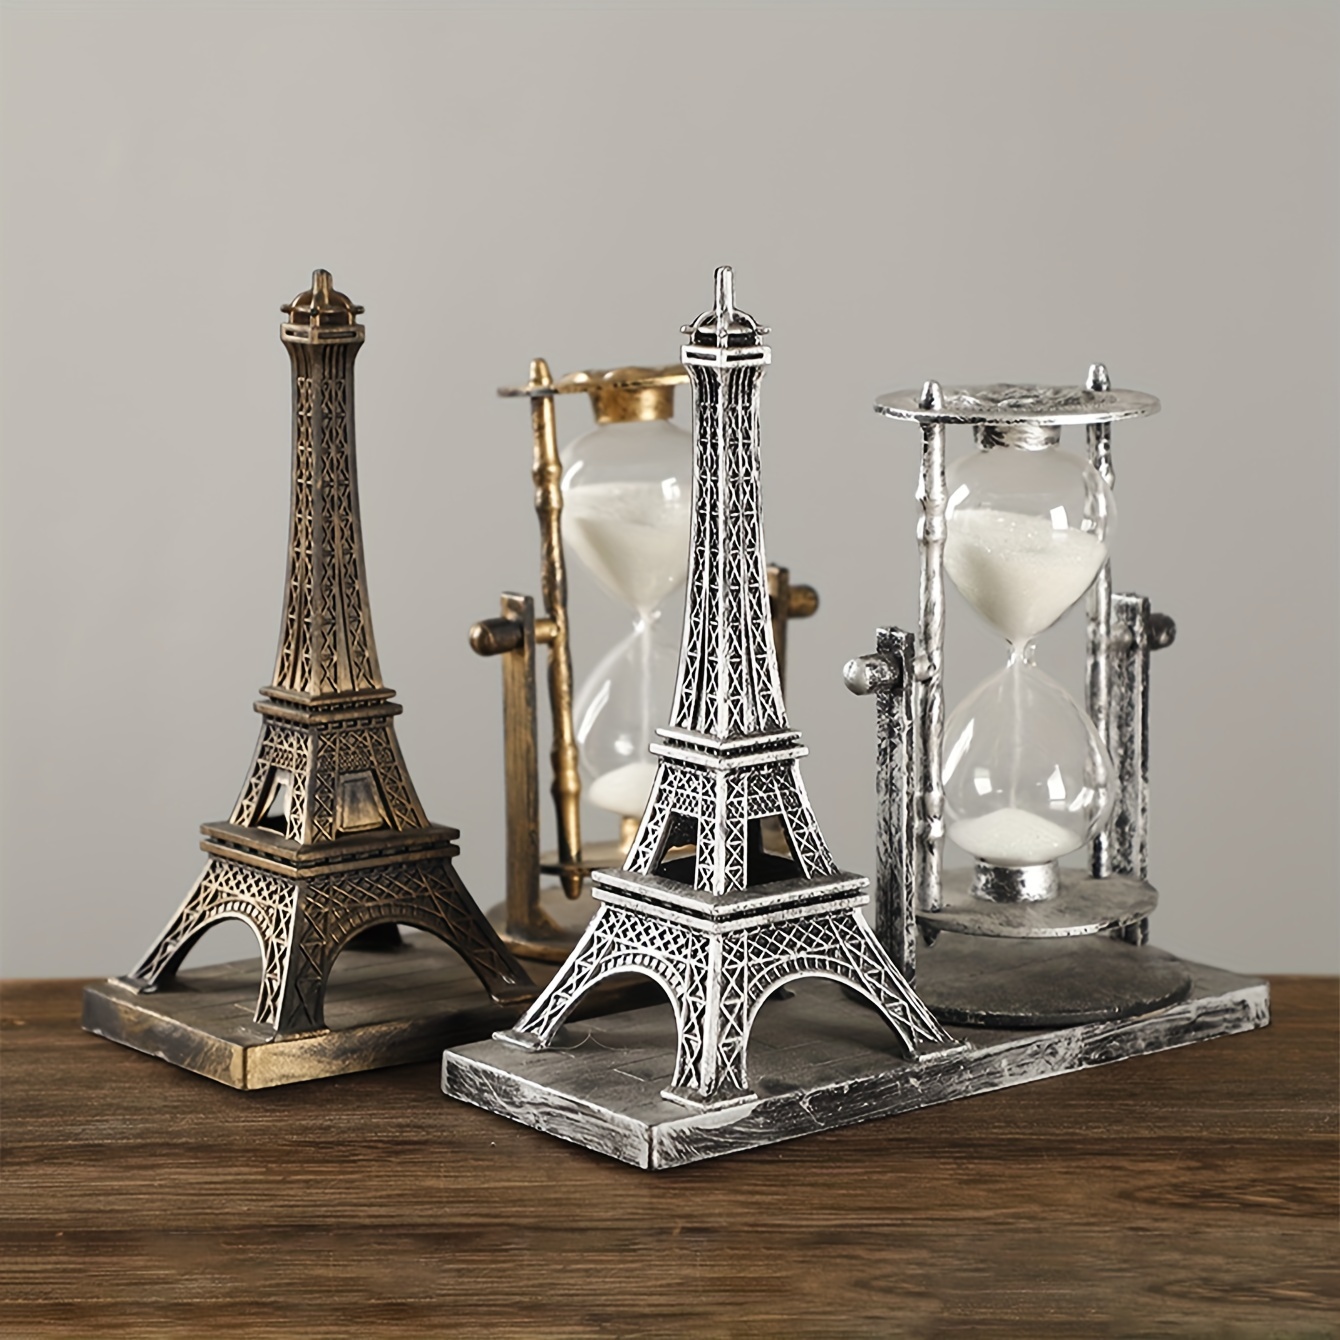 

Eiffel Tower Design Hourglass Sand Timer - Vintage Retro Style Desk Ornament, Ideal Gift For Office, Bar Cabinet, And Dining Decor, No Electricity Required (1 Piece)